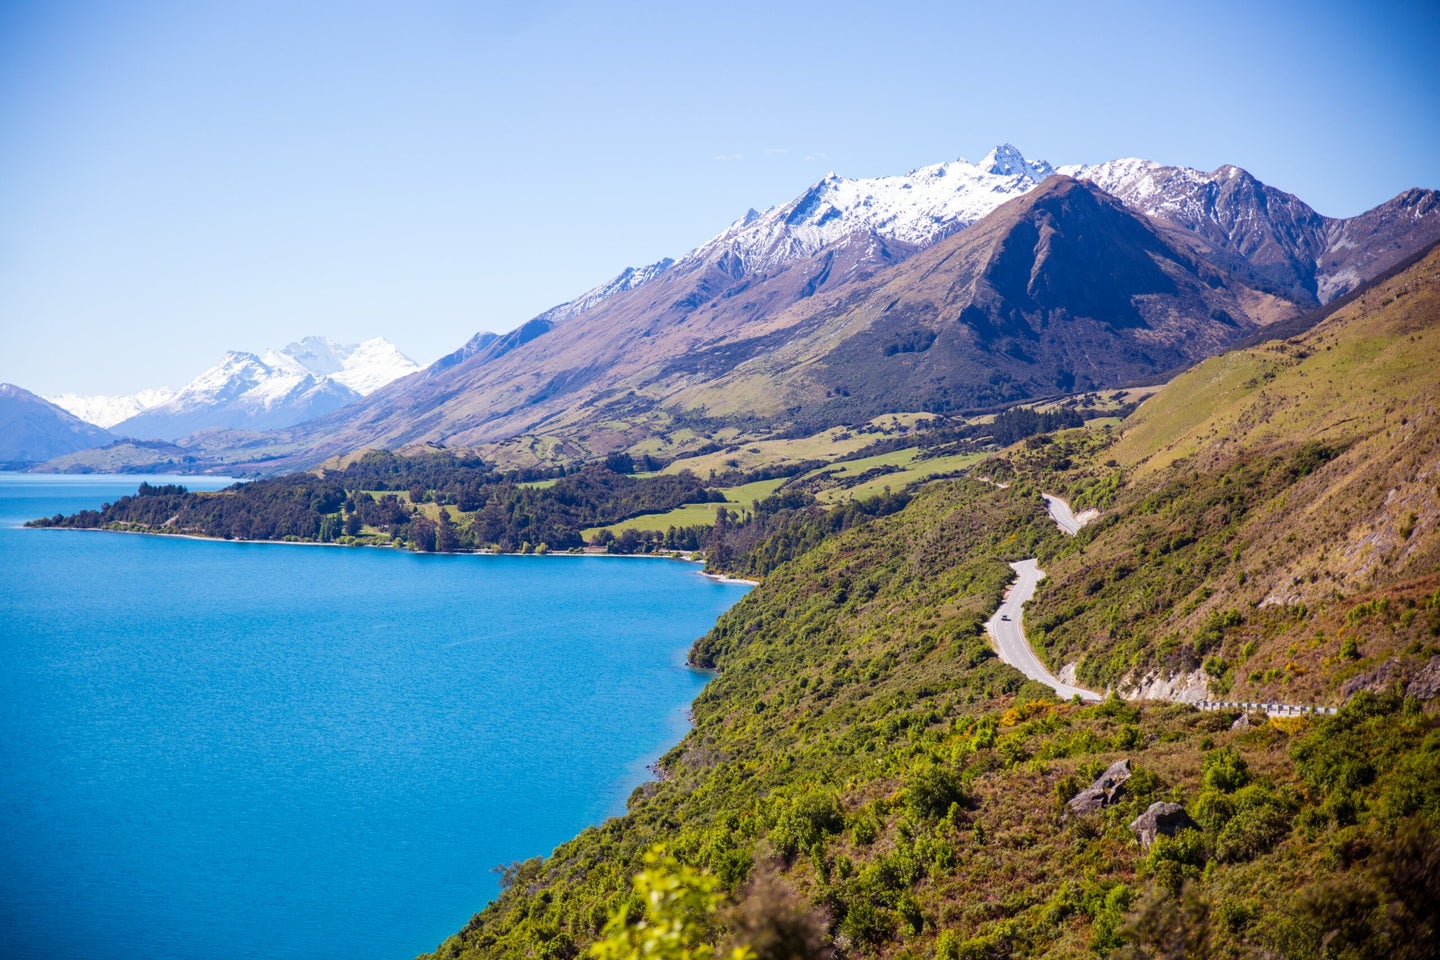 Mountains and body of water in Queenstown, New Zealand